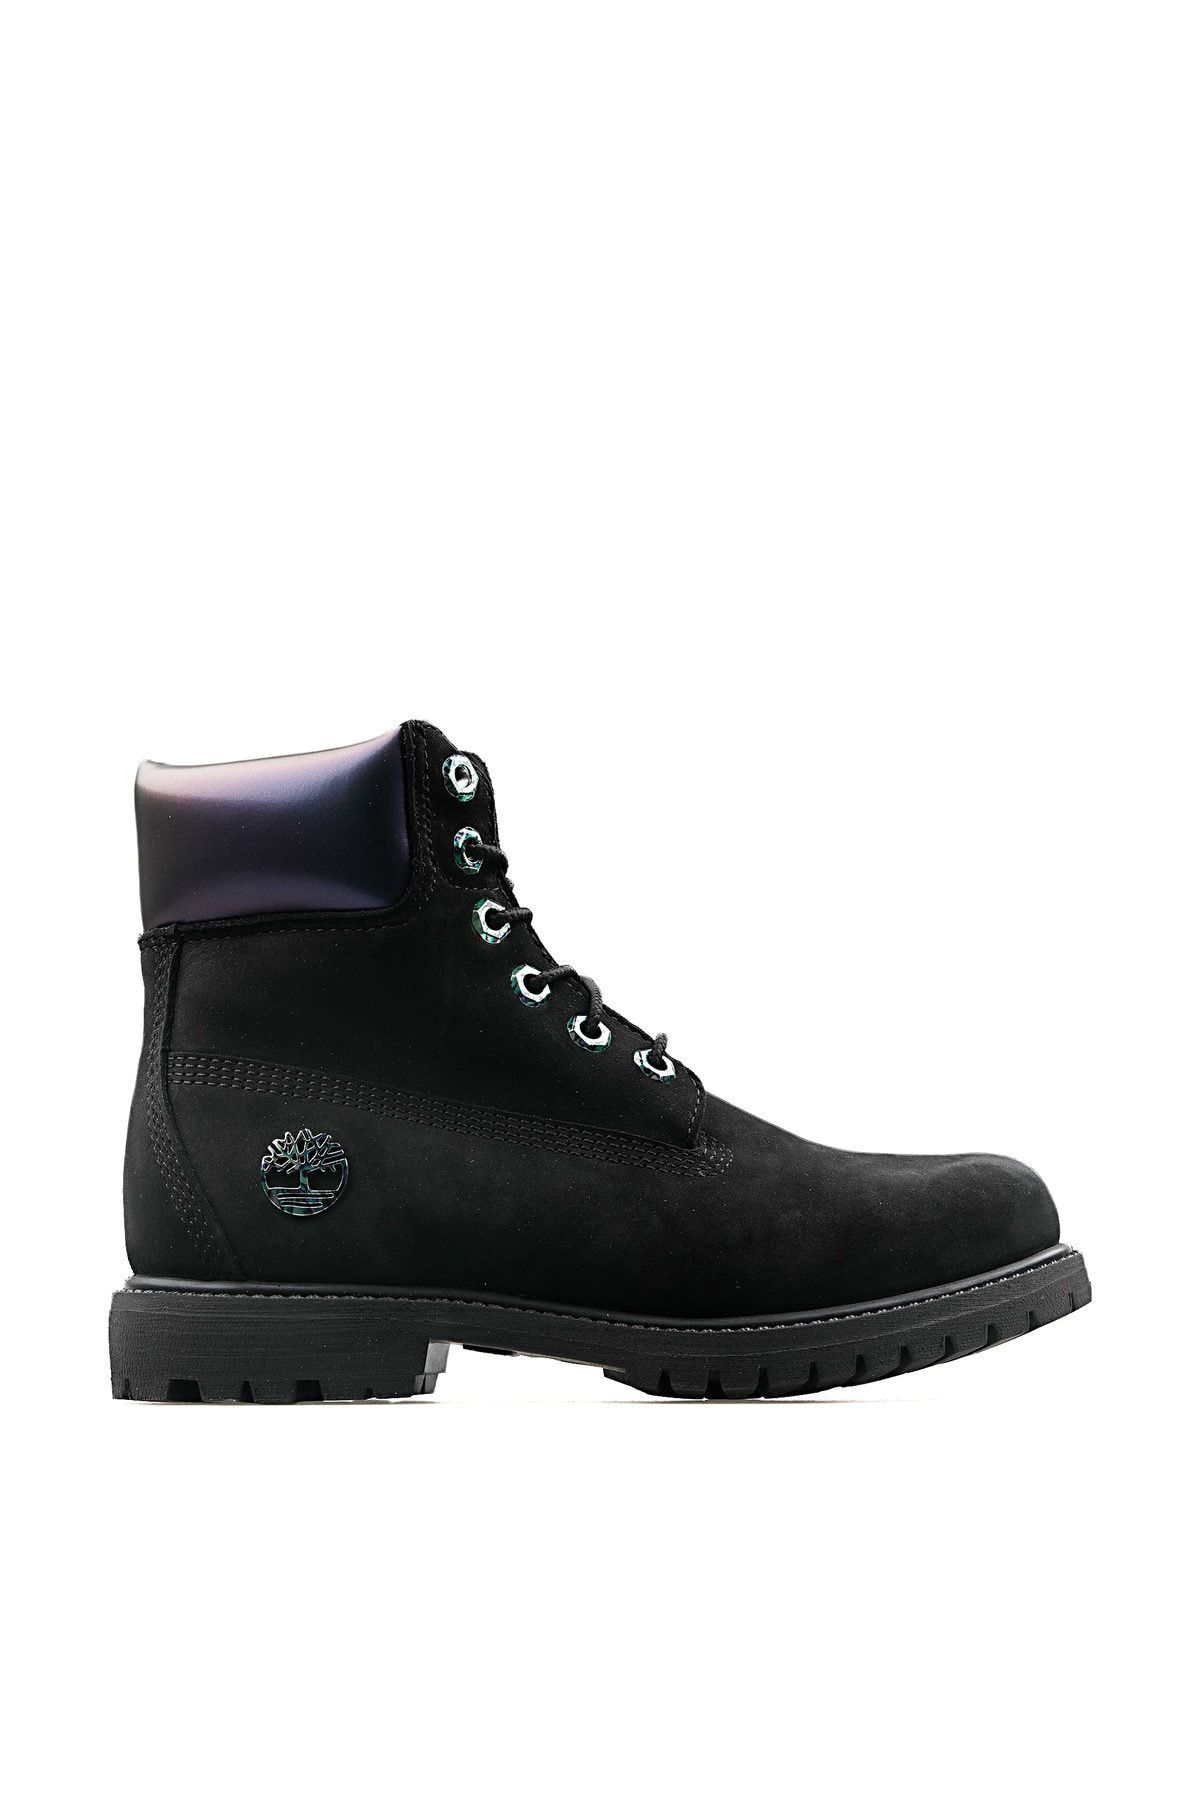 Timberland Kadın Bot & Bootie - Tb0A21Y10011 6İn Premium Boot W - TB0A21Y10011